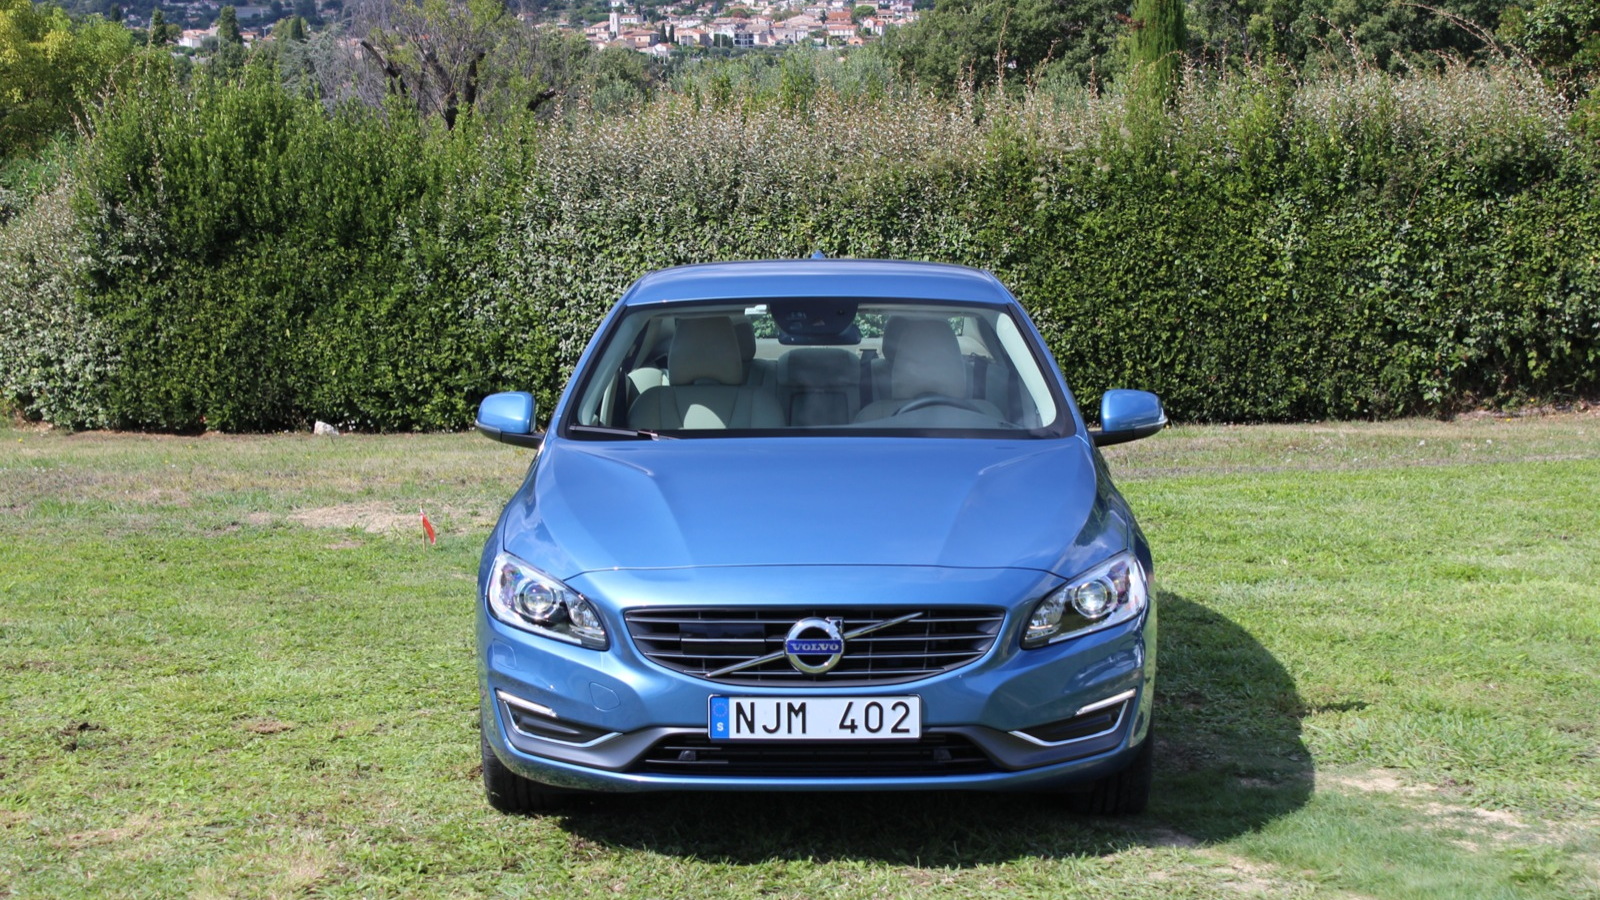 2014 Volvo S60 T6, with 2015 Drive-E powertrain  -  First Drive, September 2013